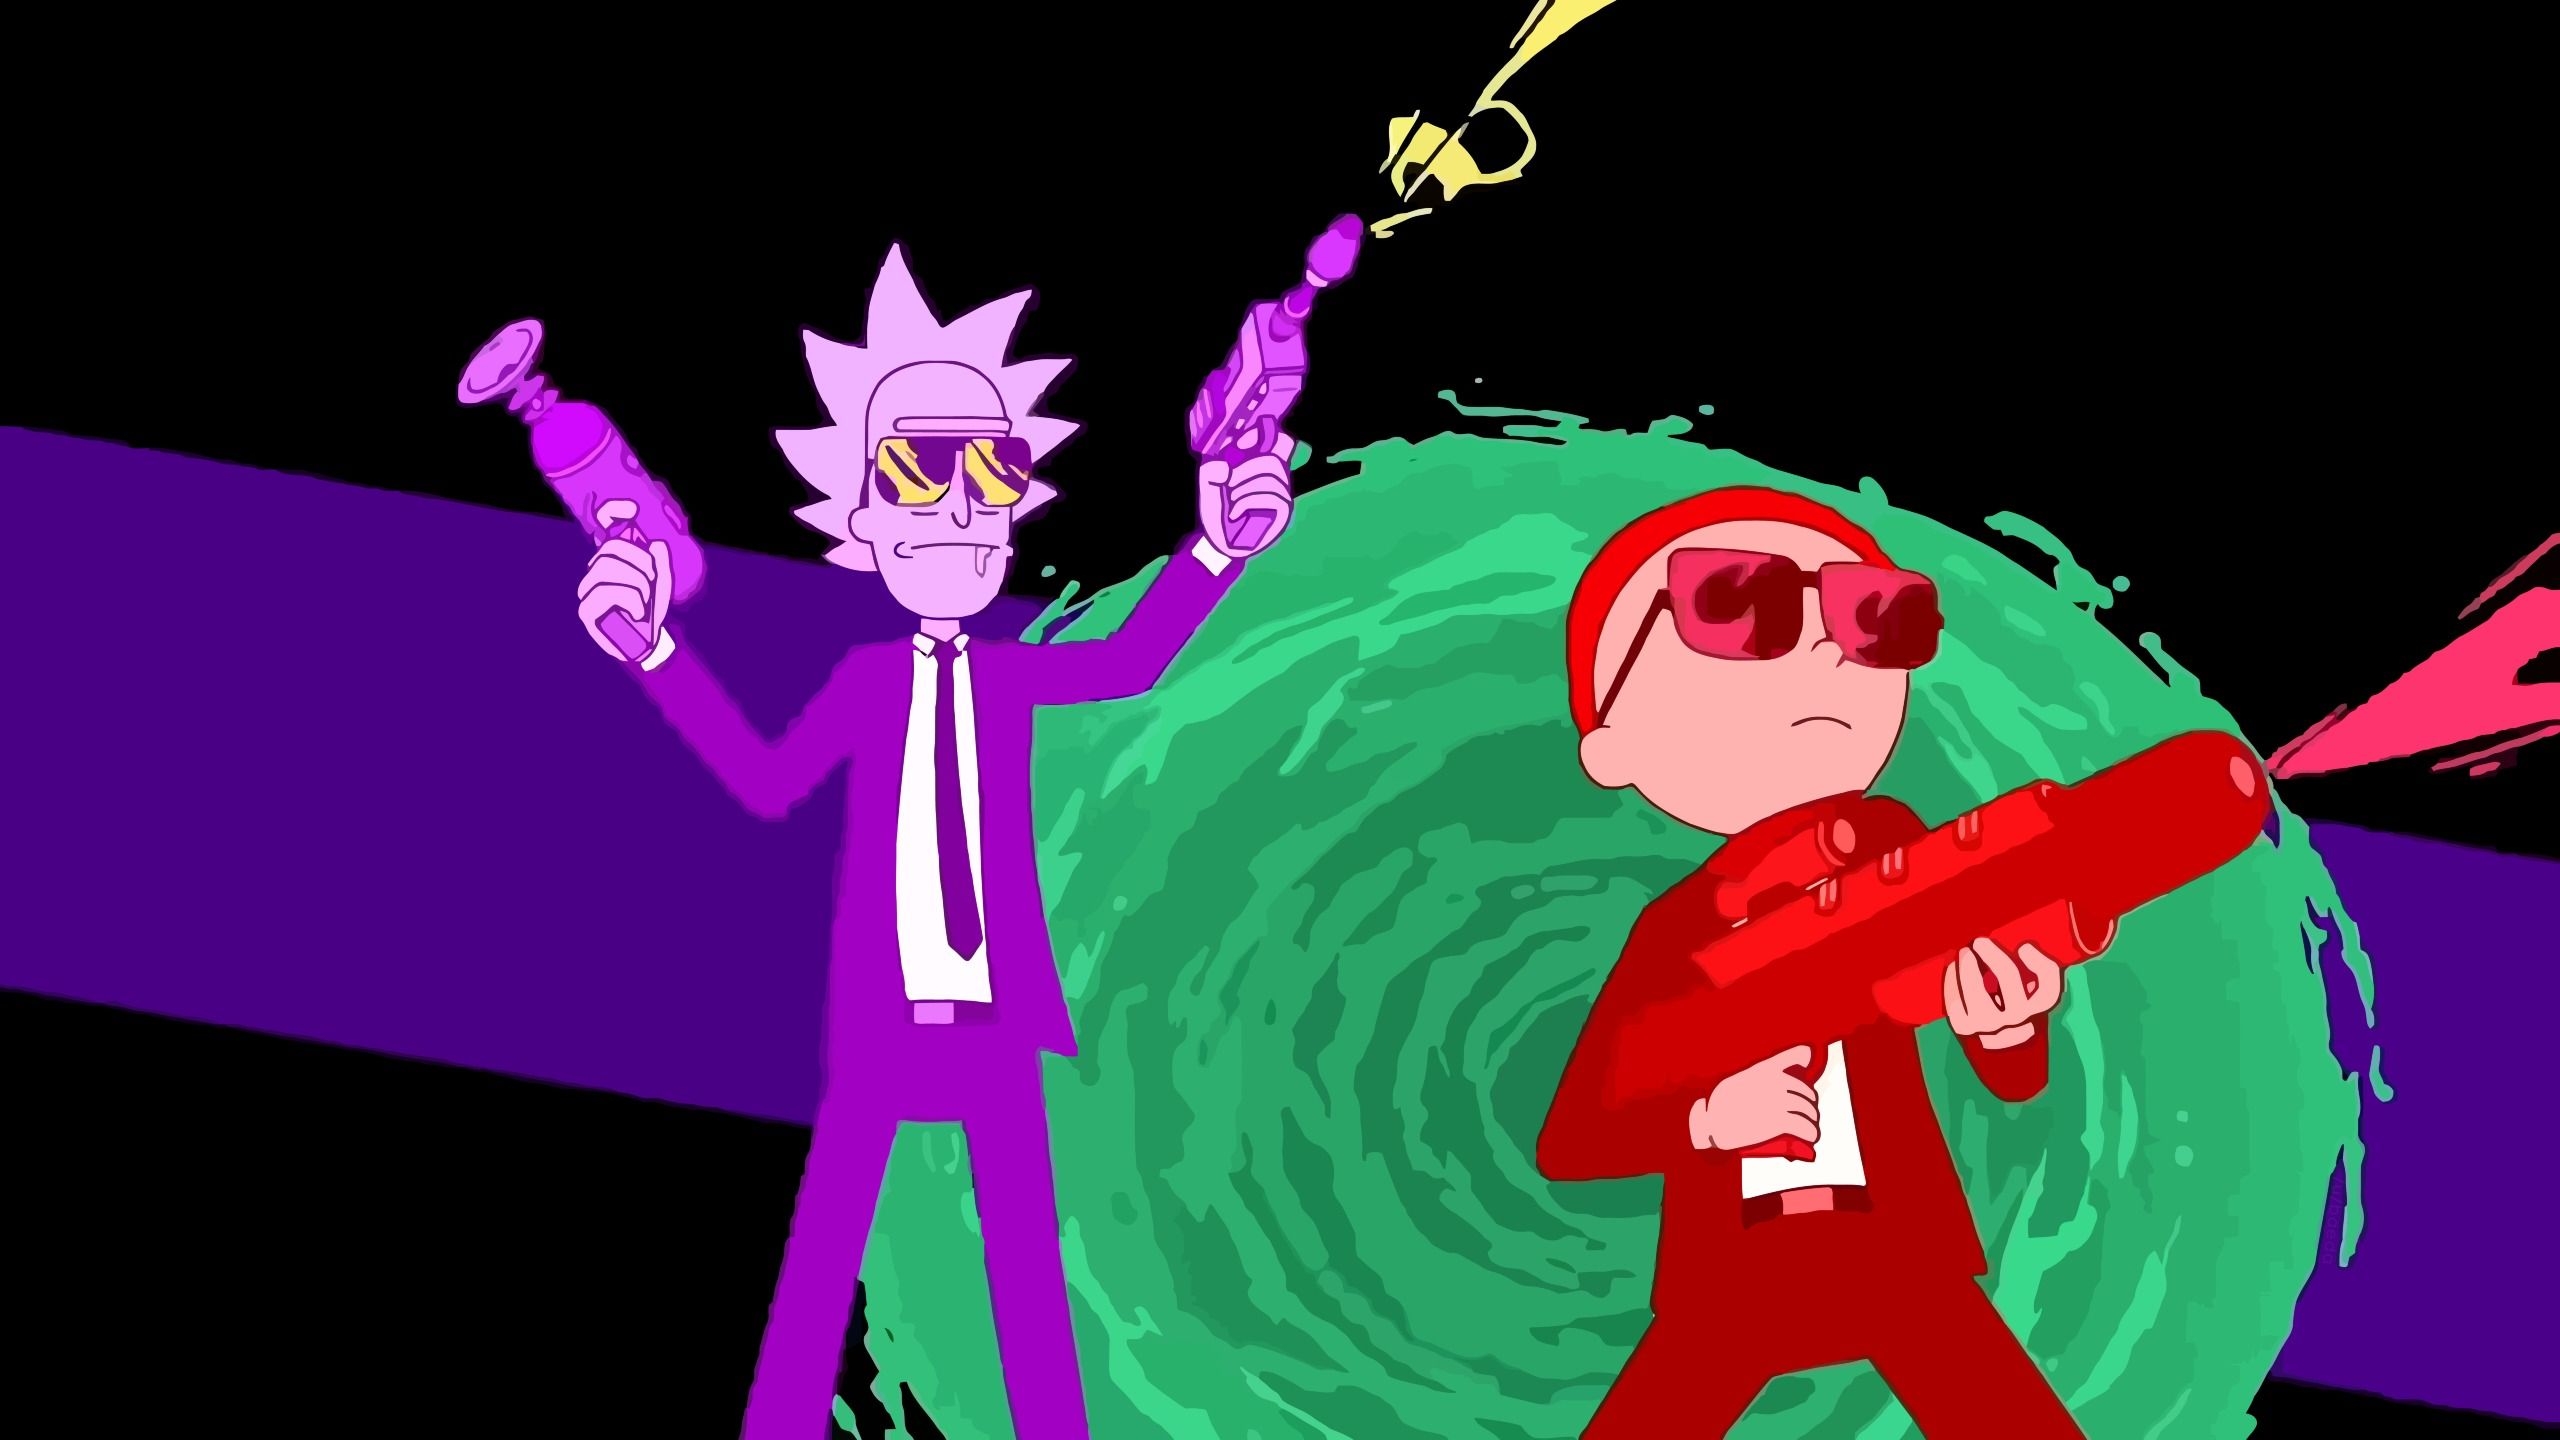 Rick and Morty Run The Jewels Art 1440P Resolution